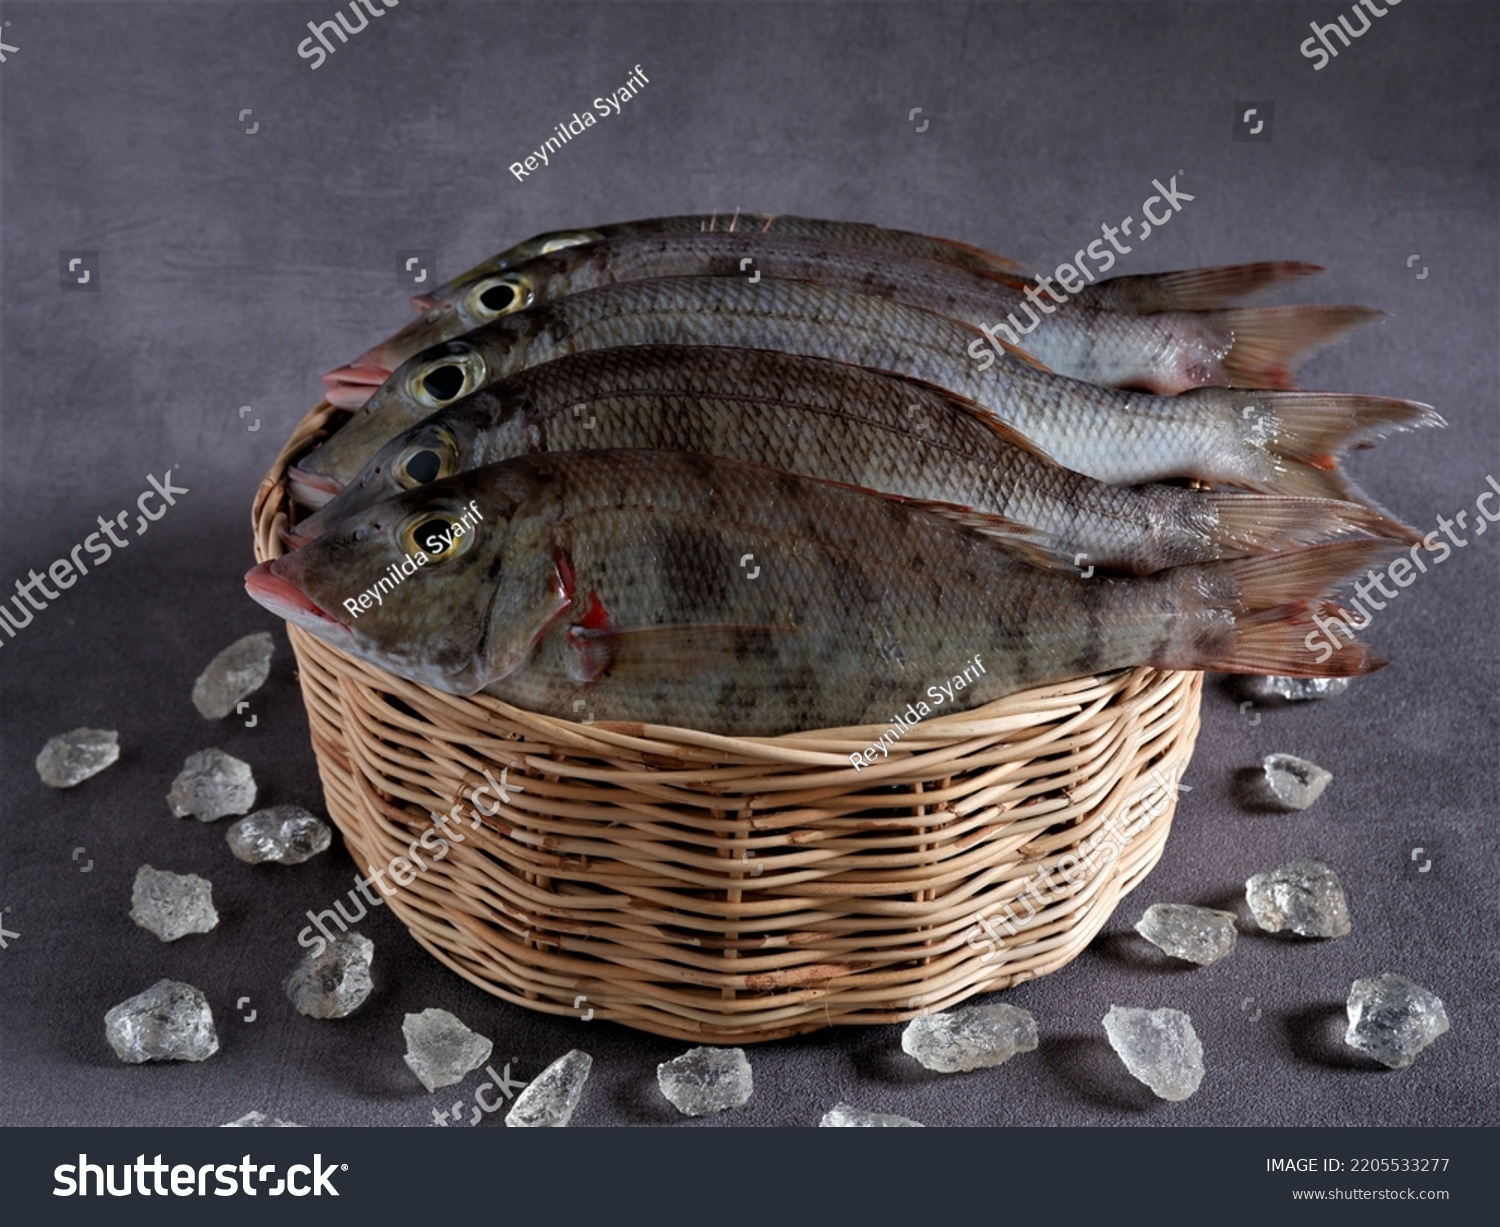 Fresh "Belacung" Fish in rattan basket with ice shards on dark grey background. Lethrinus. Lethrinus Rubrioperculatus. Lethrinus Onartus. Lethrinus Olivaceus. Raw Food. Protein. Aceh. Indonesia.  #2205533277